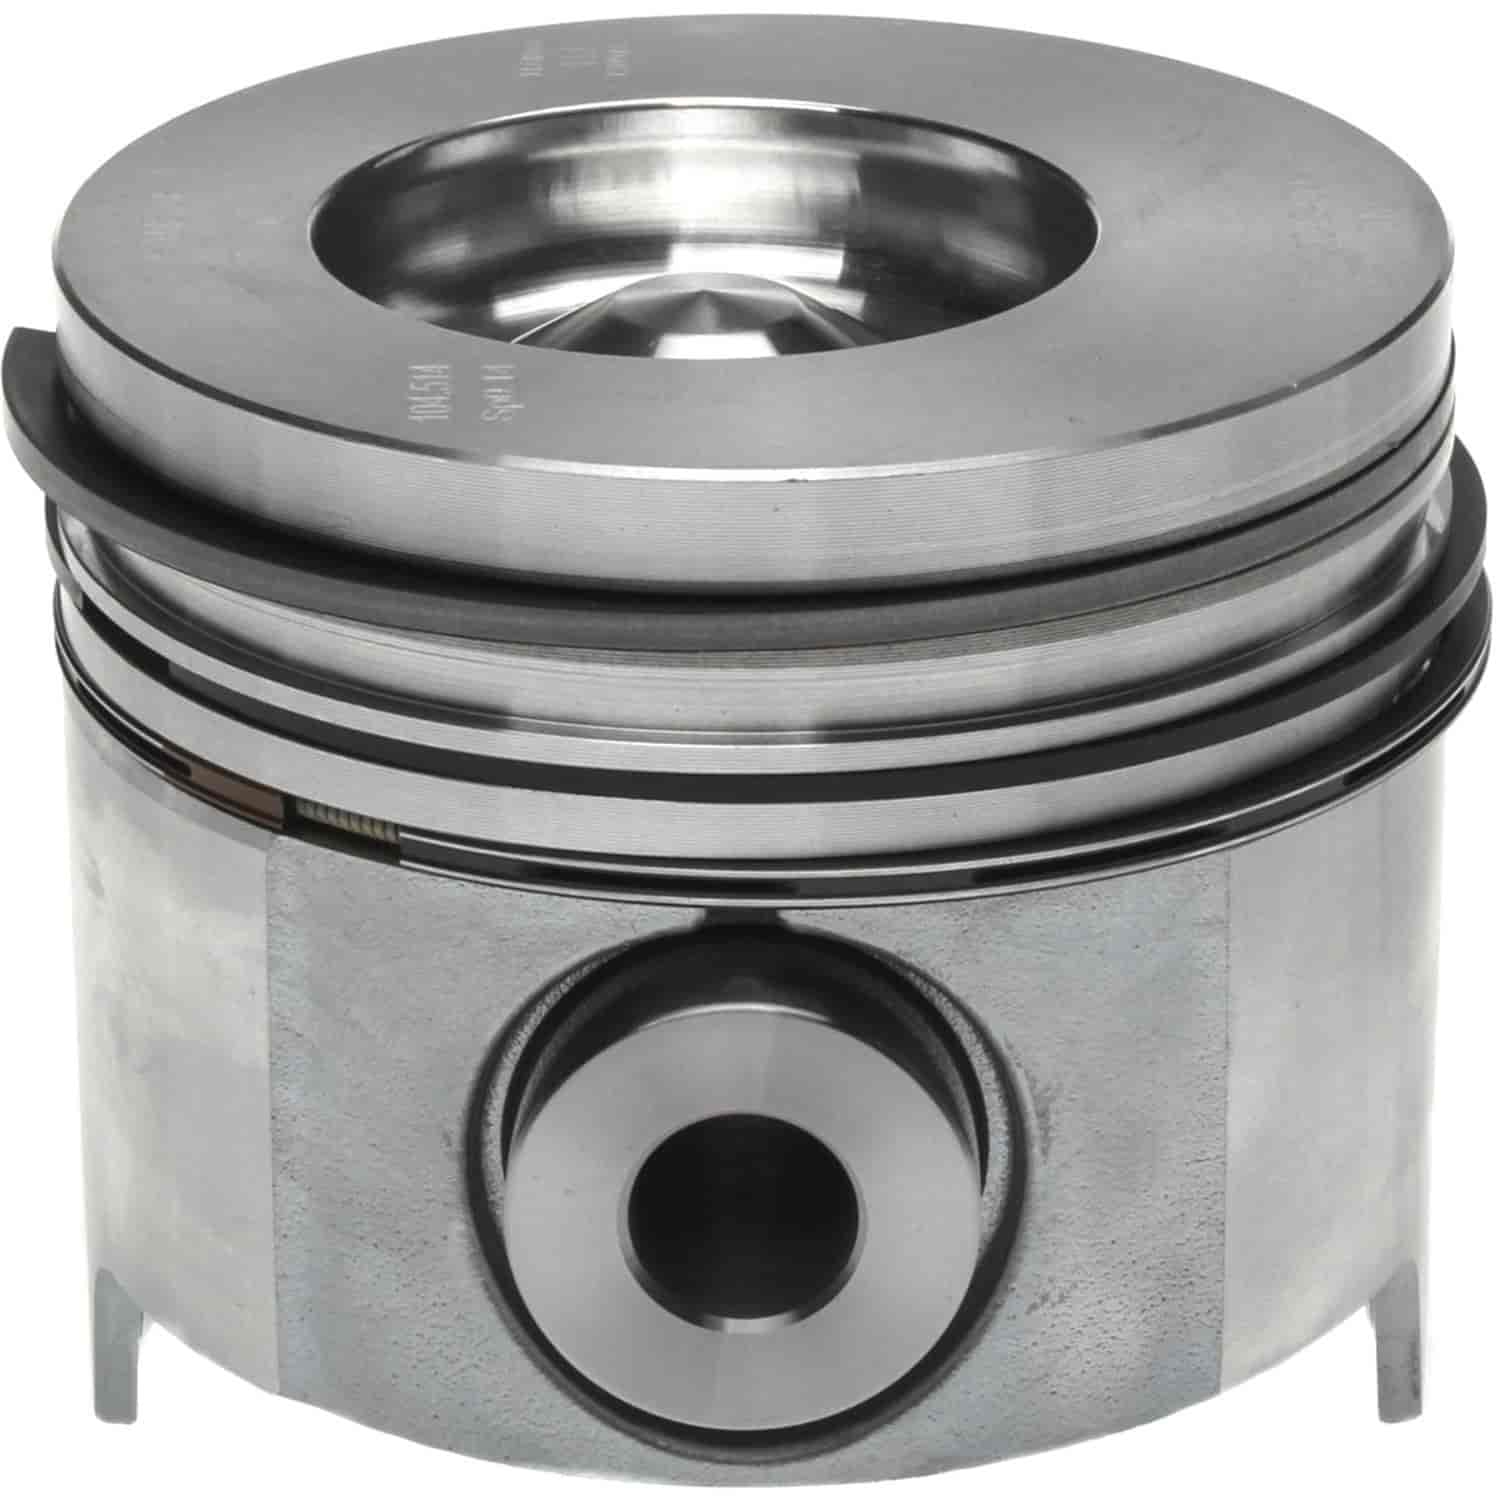 Piston and Rings Set 2001-2005 Chevy/GMC Duramax Diesel V8 6.6L Right Bank with 4.065" Bore (+.010")